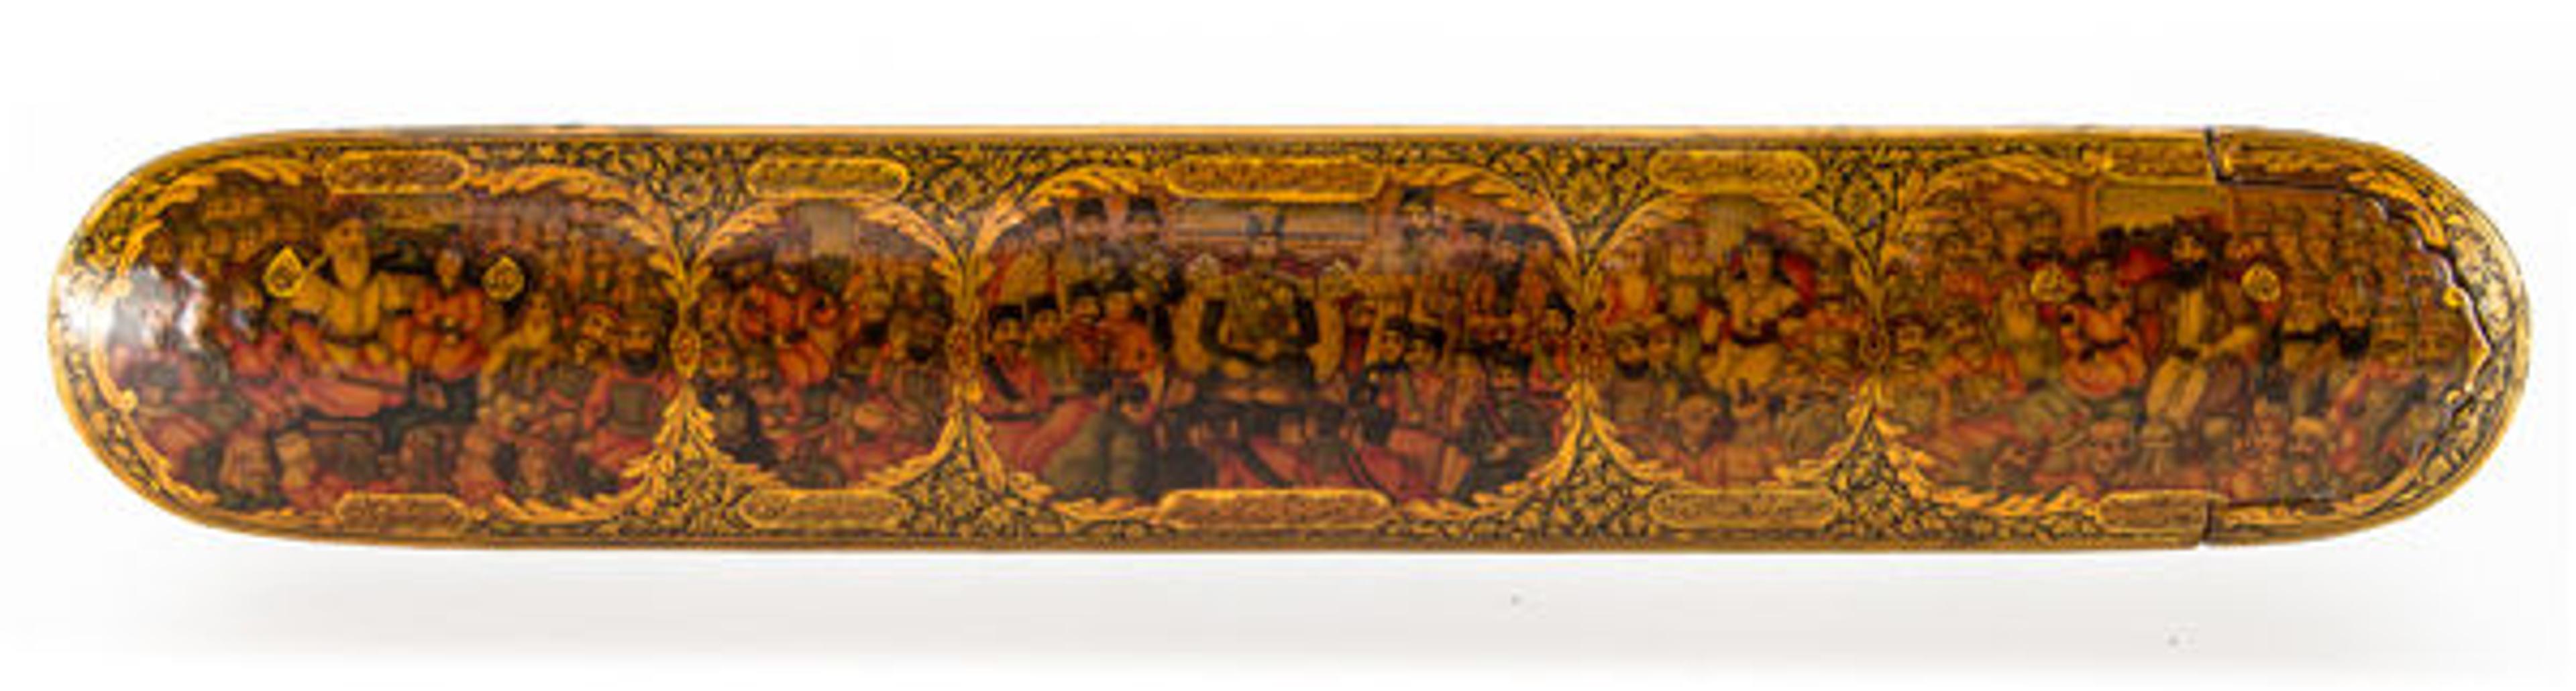 Lacquer pen box with royal audience scenes, ca. 1870–90. Iran. Islamic. Papier-mache; painted and lacquered; H. 1 9/16 in. (4 cm), W. 9 1/16 in. (23 cm), D. 1 1/4 in. (3.3 cm). The Metropolitan Museum of Art, New York, Purchase, Goldman Sachs Gift, 2014 (2014.258)